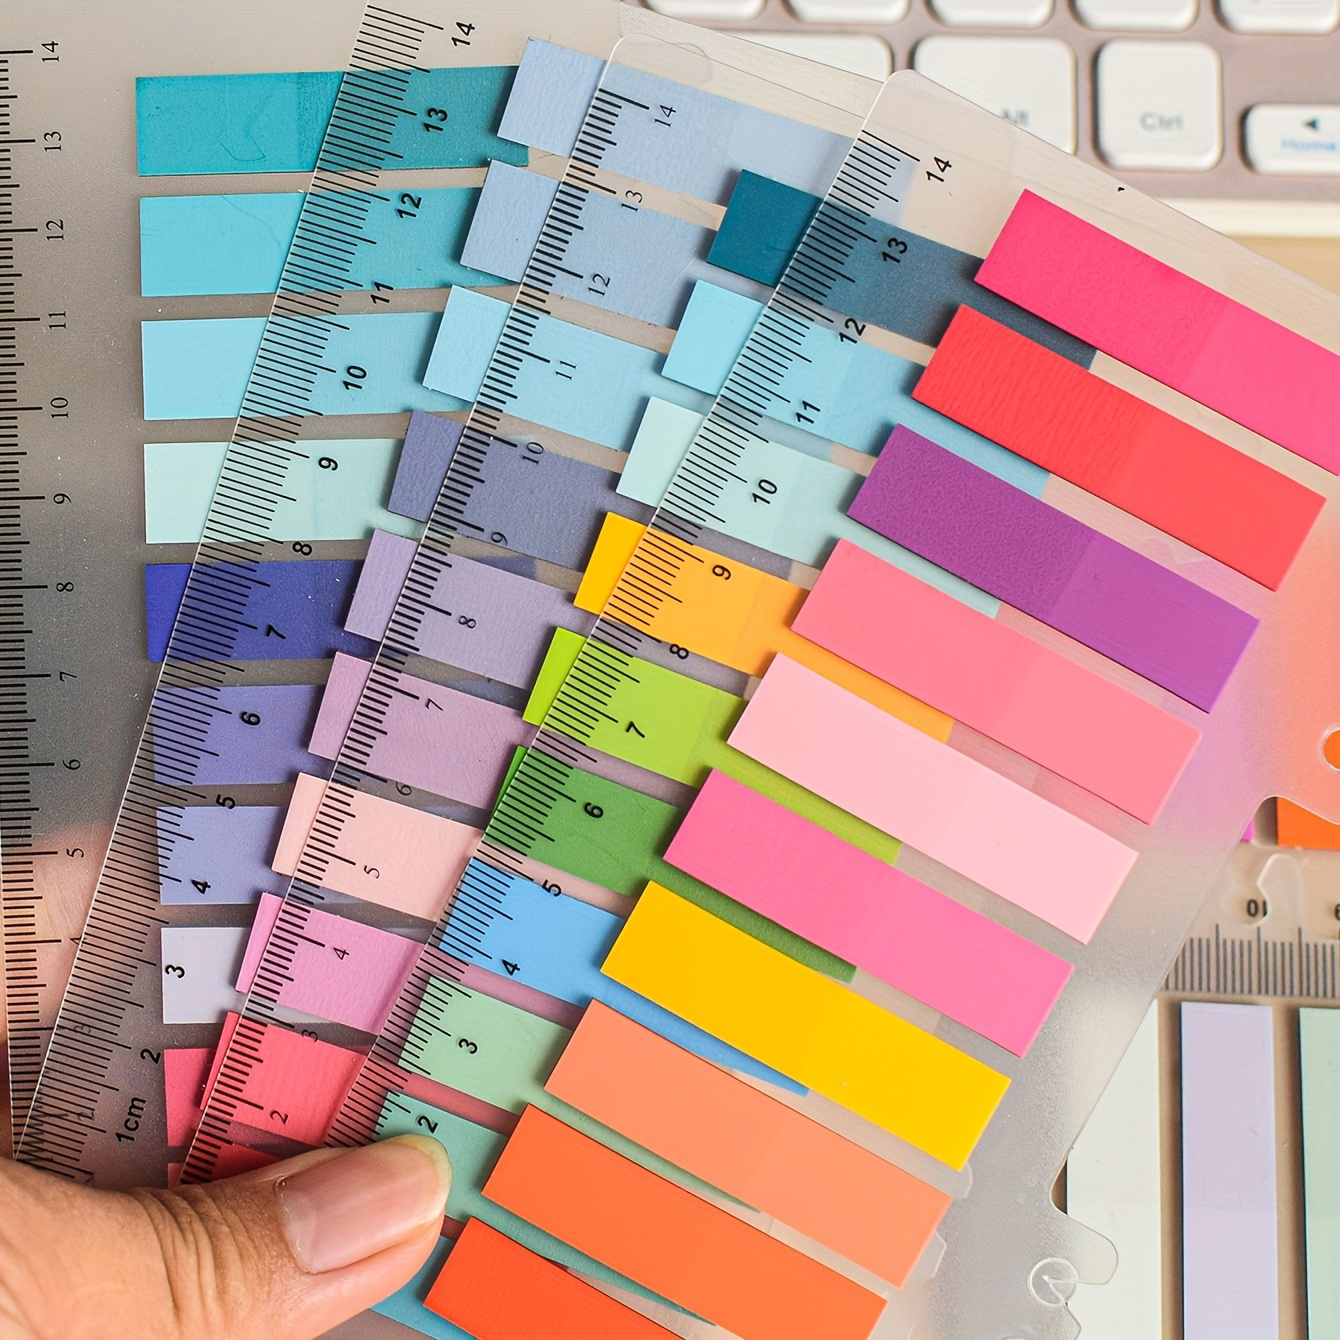 Sticky Tabs For Annotating Books Clear Sticky Notes Book - Temu United Arab  Emirates